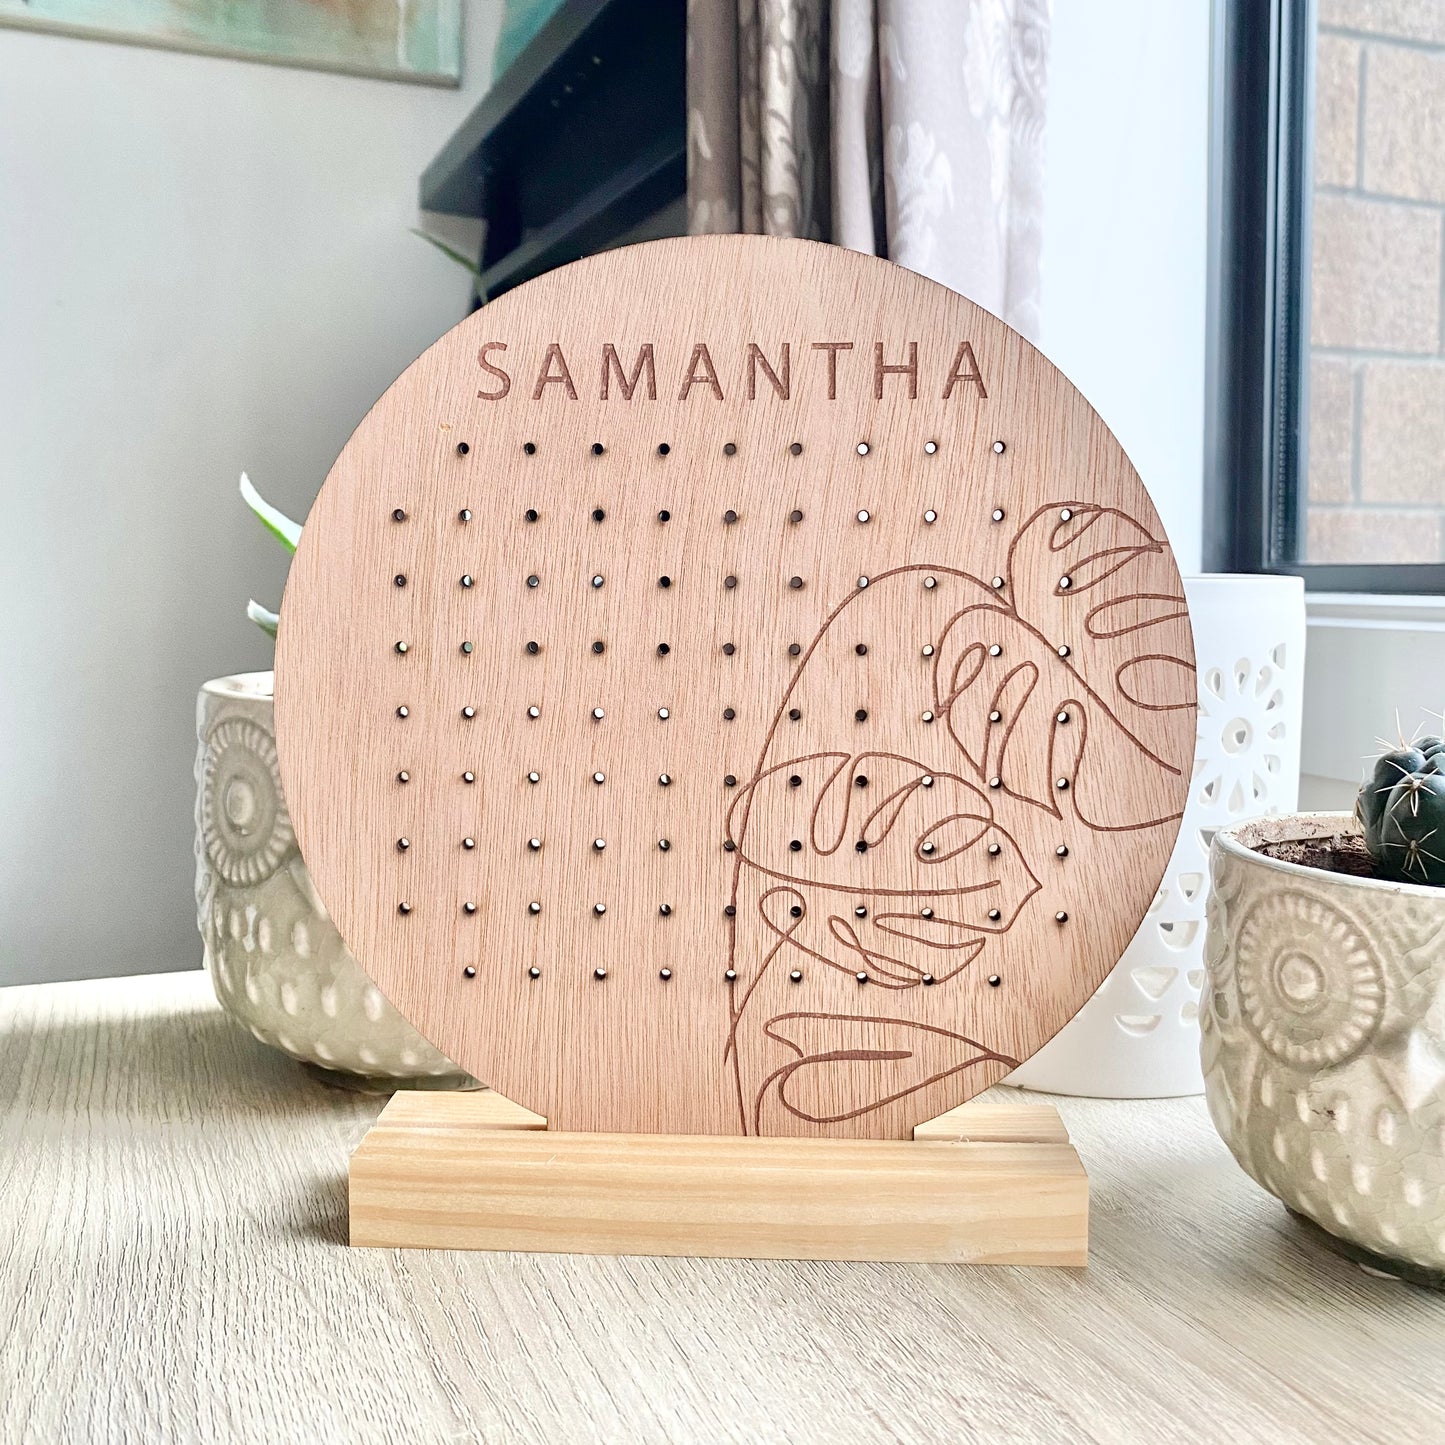 The Samantha earring stand